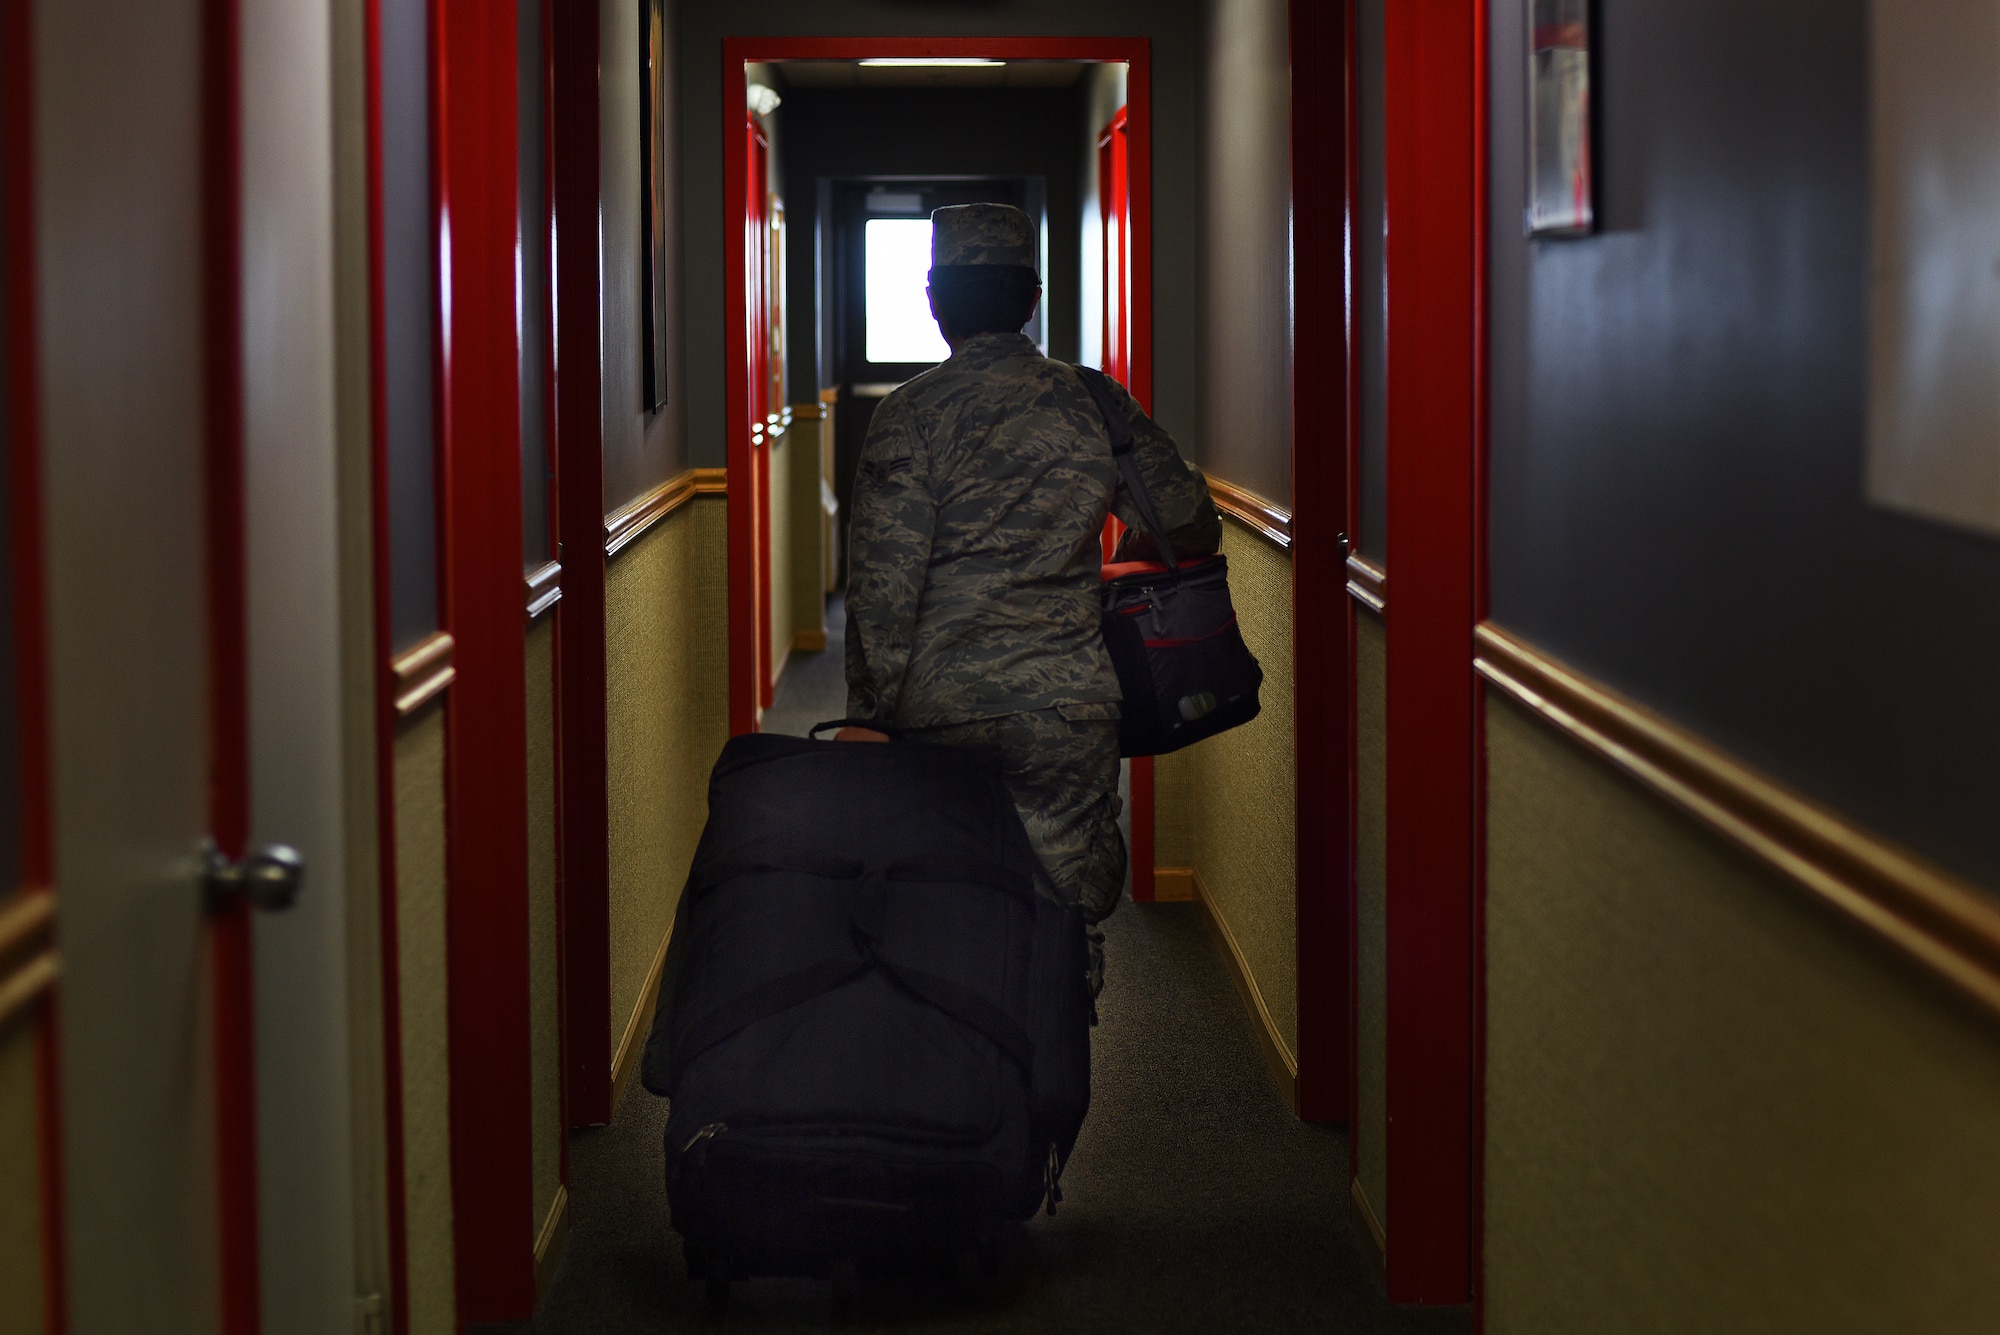 Airman 1st Class Victoria Camargo, 341st Force Support Squadron missile chef, walks toward her living quarters at a missile alert facility Oct. 18, 2019, near Malmstrom Air Force Base, Montana.